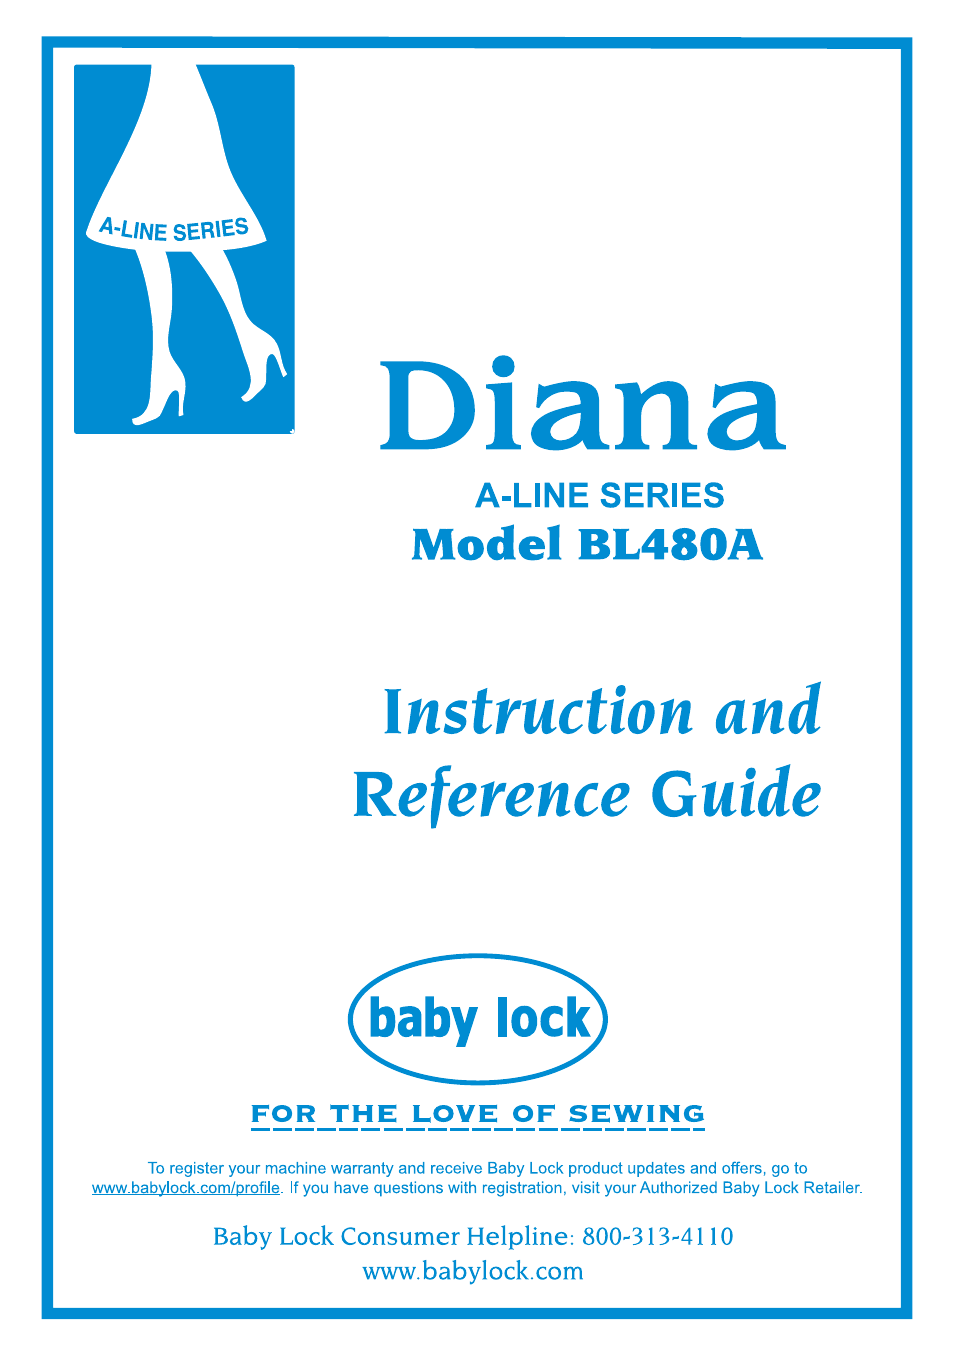 Diana (BL480A) Instruction and Reference Guide